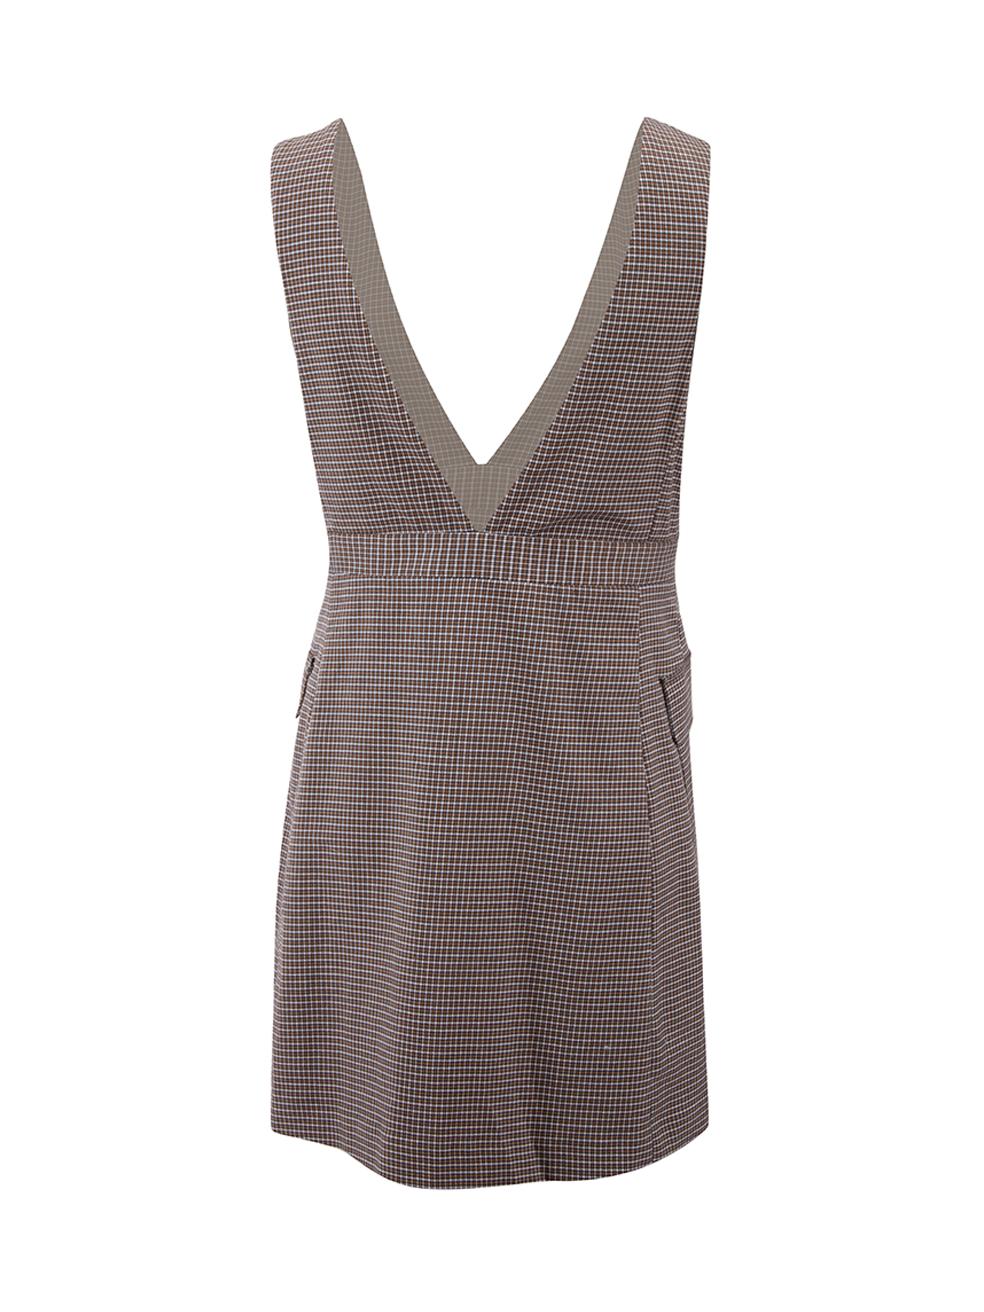 Chloé See by Chloé Brown Houndstooth Pinafore Dress Size S In Good Condition For Sale In London, GB